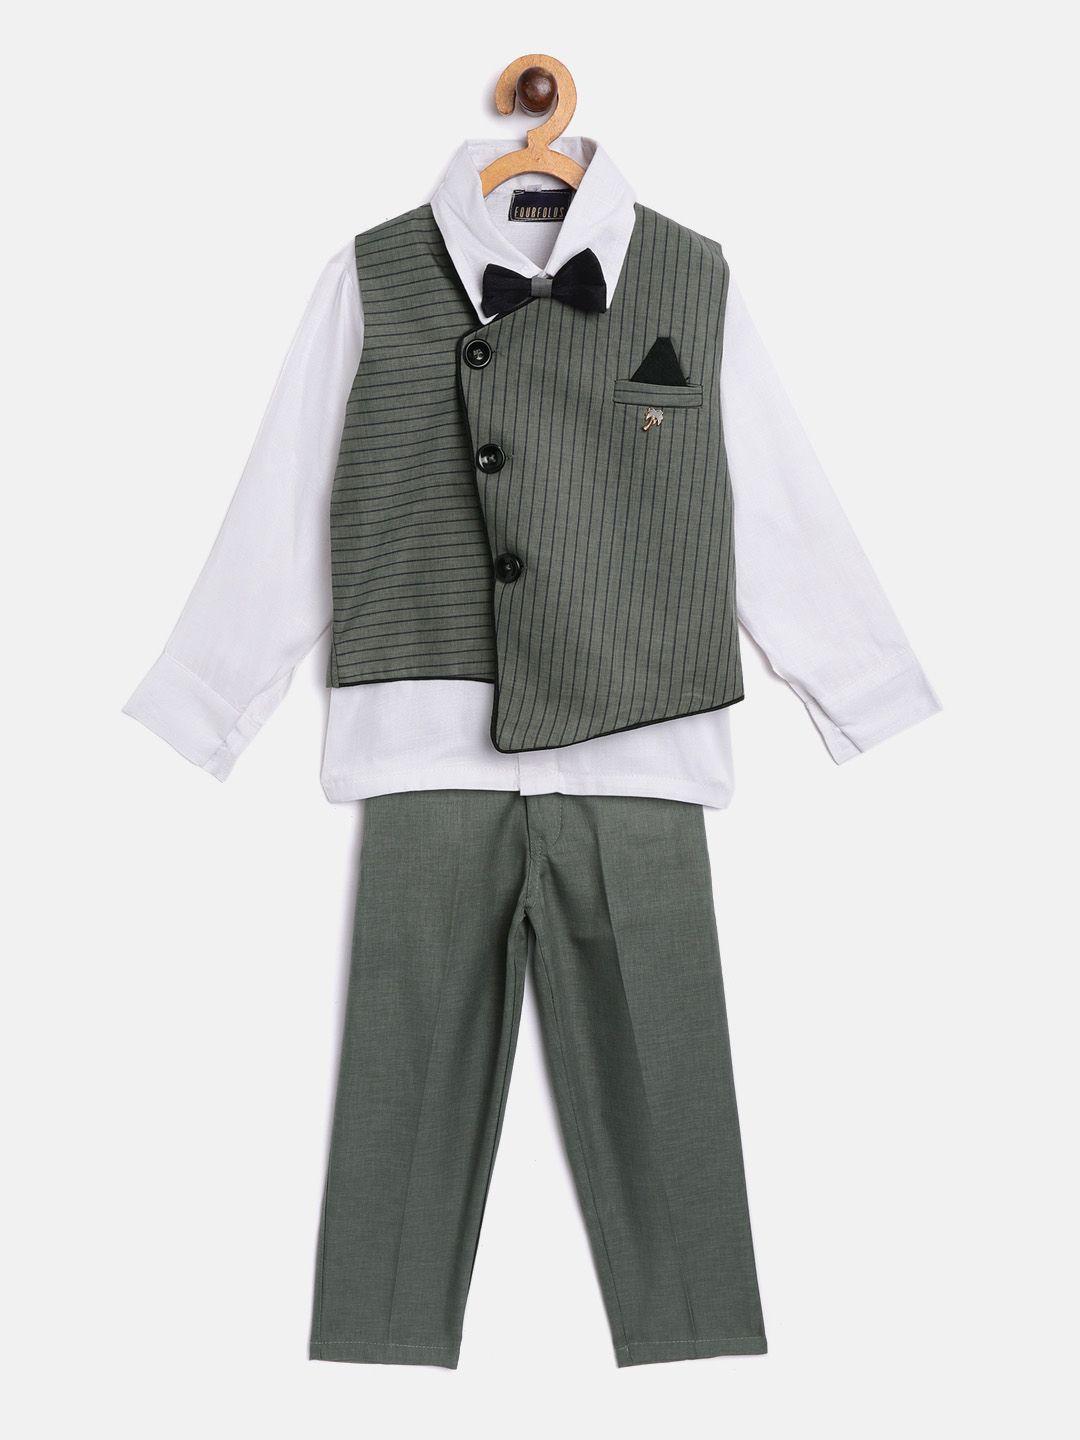 fourfolds-boys-white-&-olive-green-solid-clothing-set-with-waistcoat-&-bow